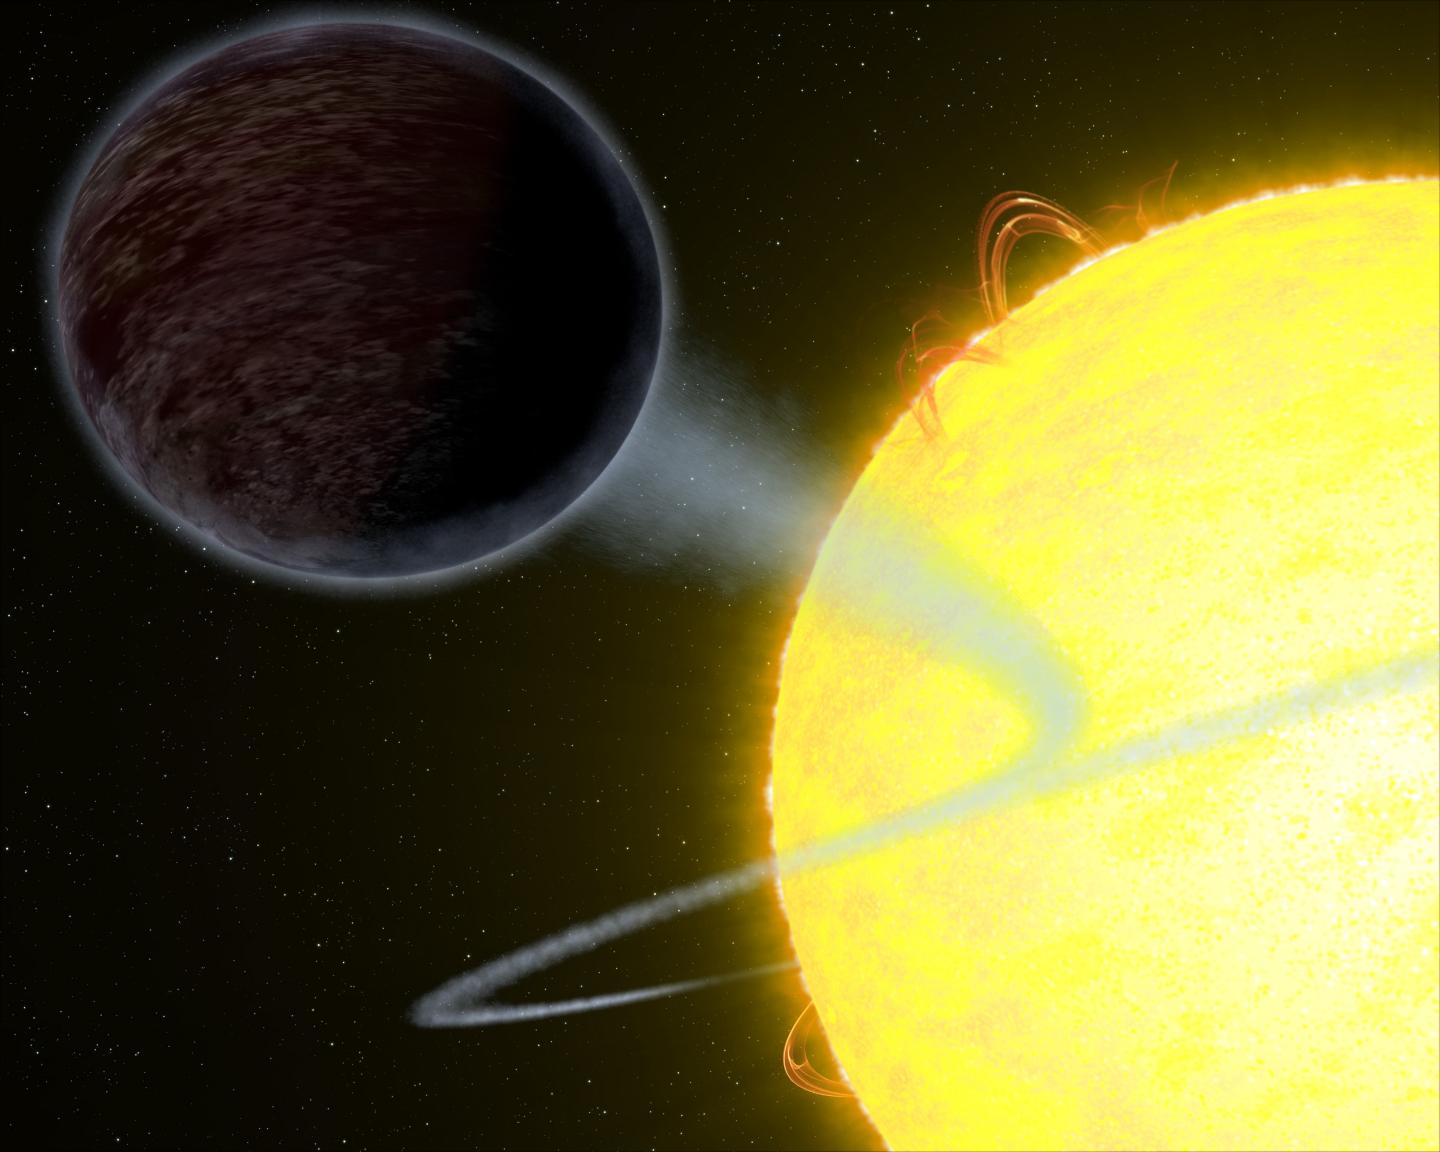 Artist's View of Extrasolar Planet WASP-12b.